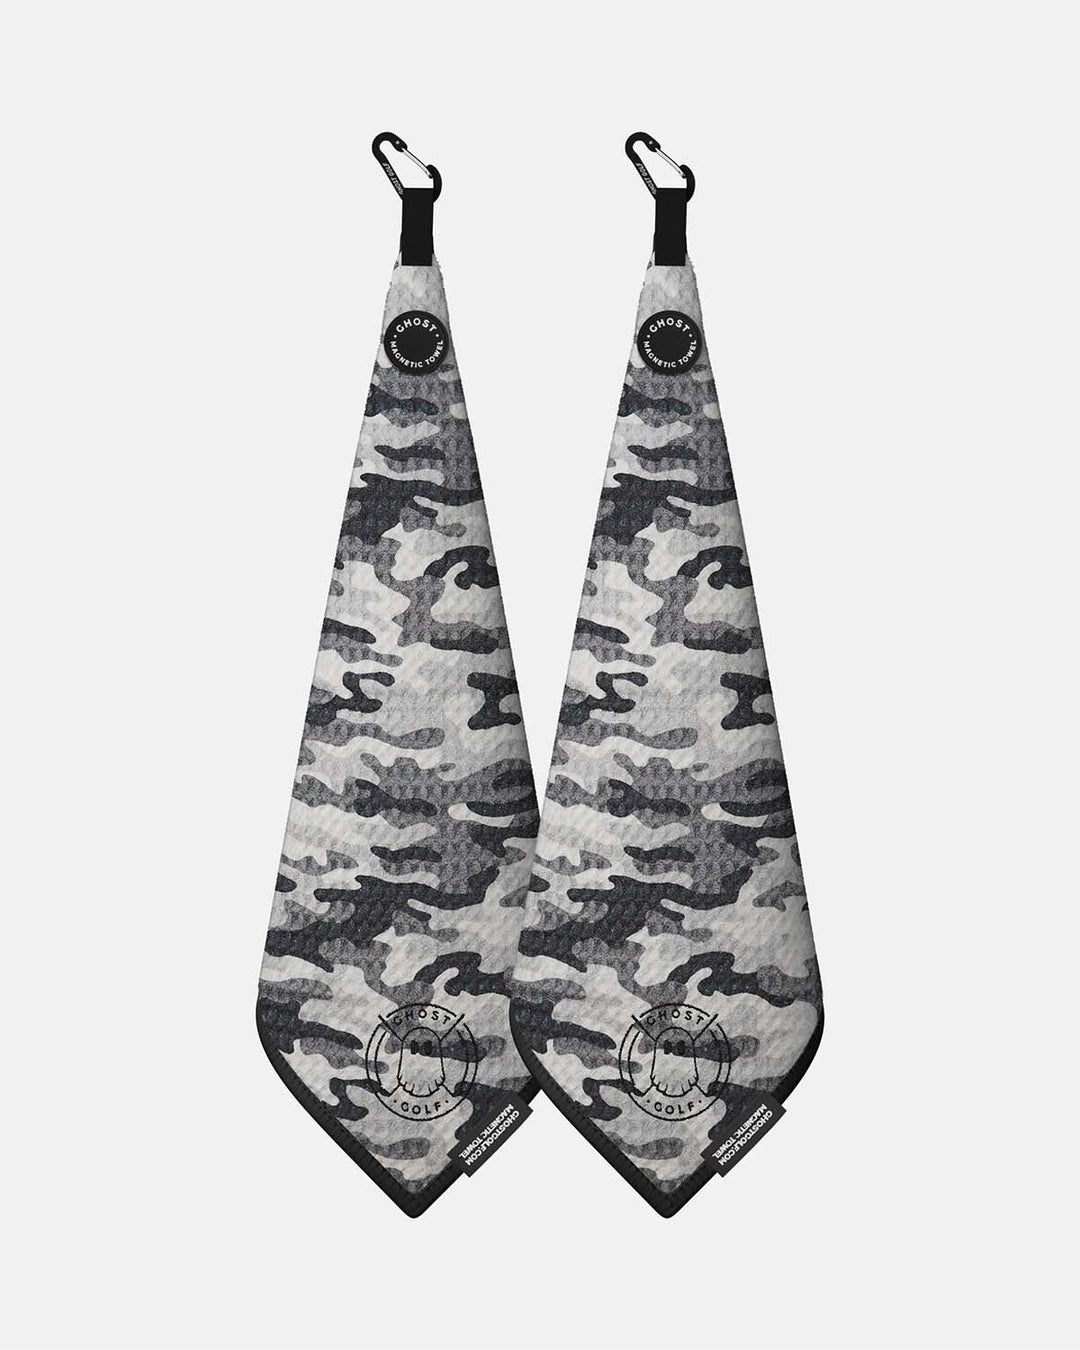 2 Greenside towels with Magnet Patch and Carabiner. Color Snow Camo